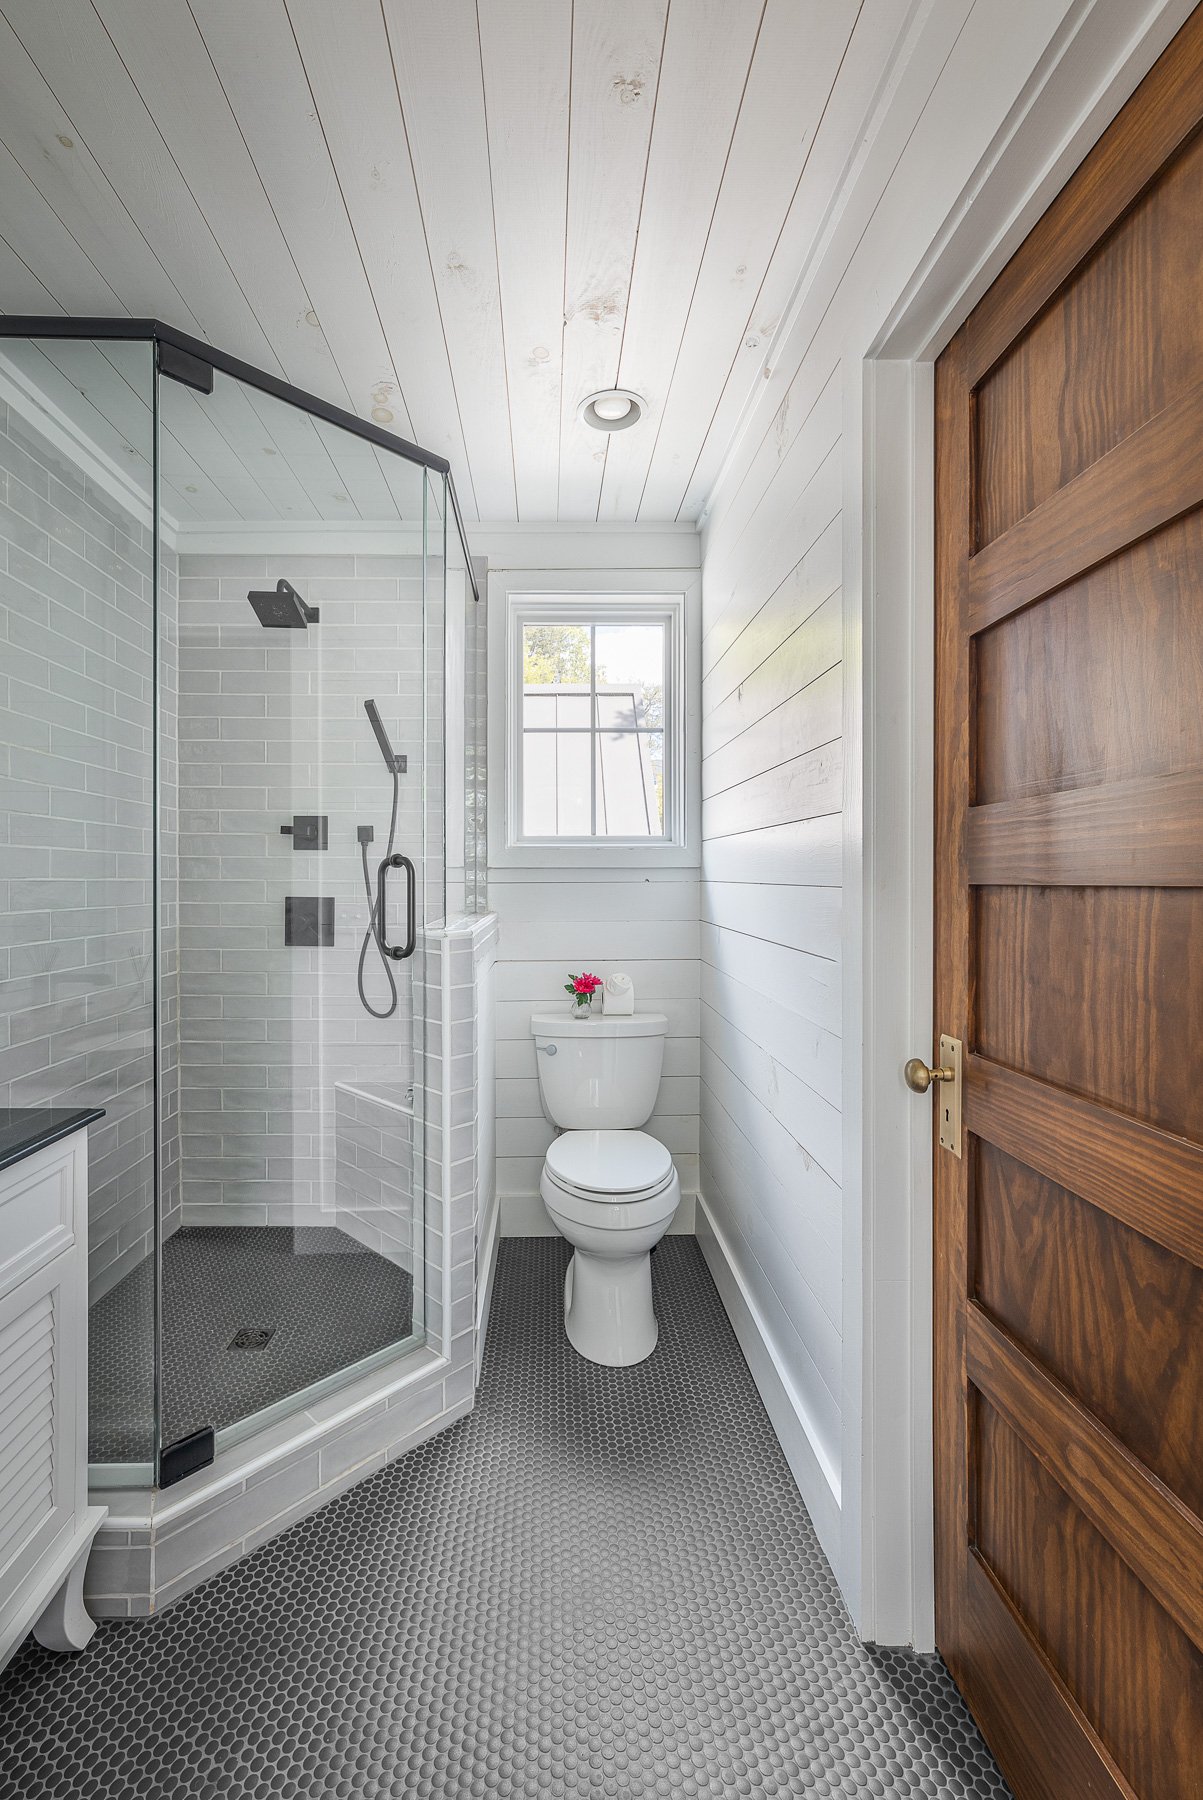 Contemporary bathroom with glass shower, white shiplap walls, and hexagon tile floor.